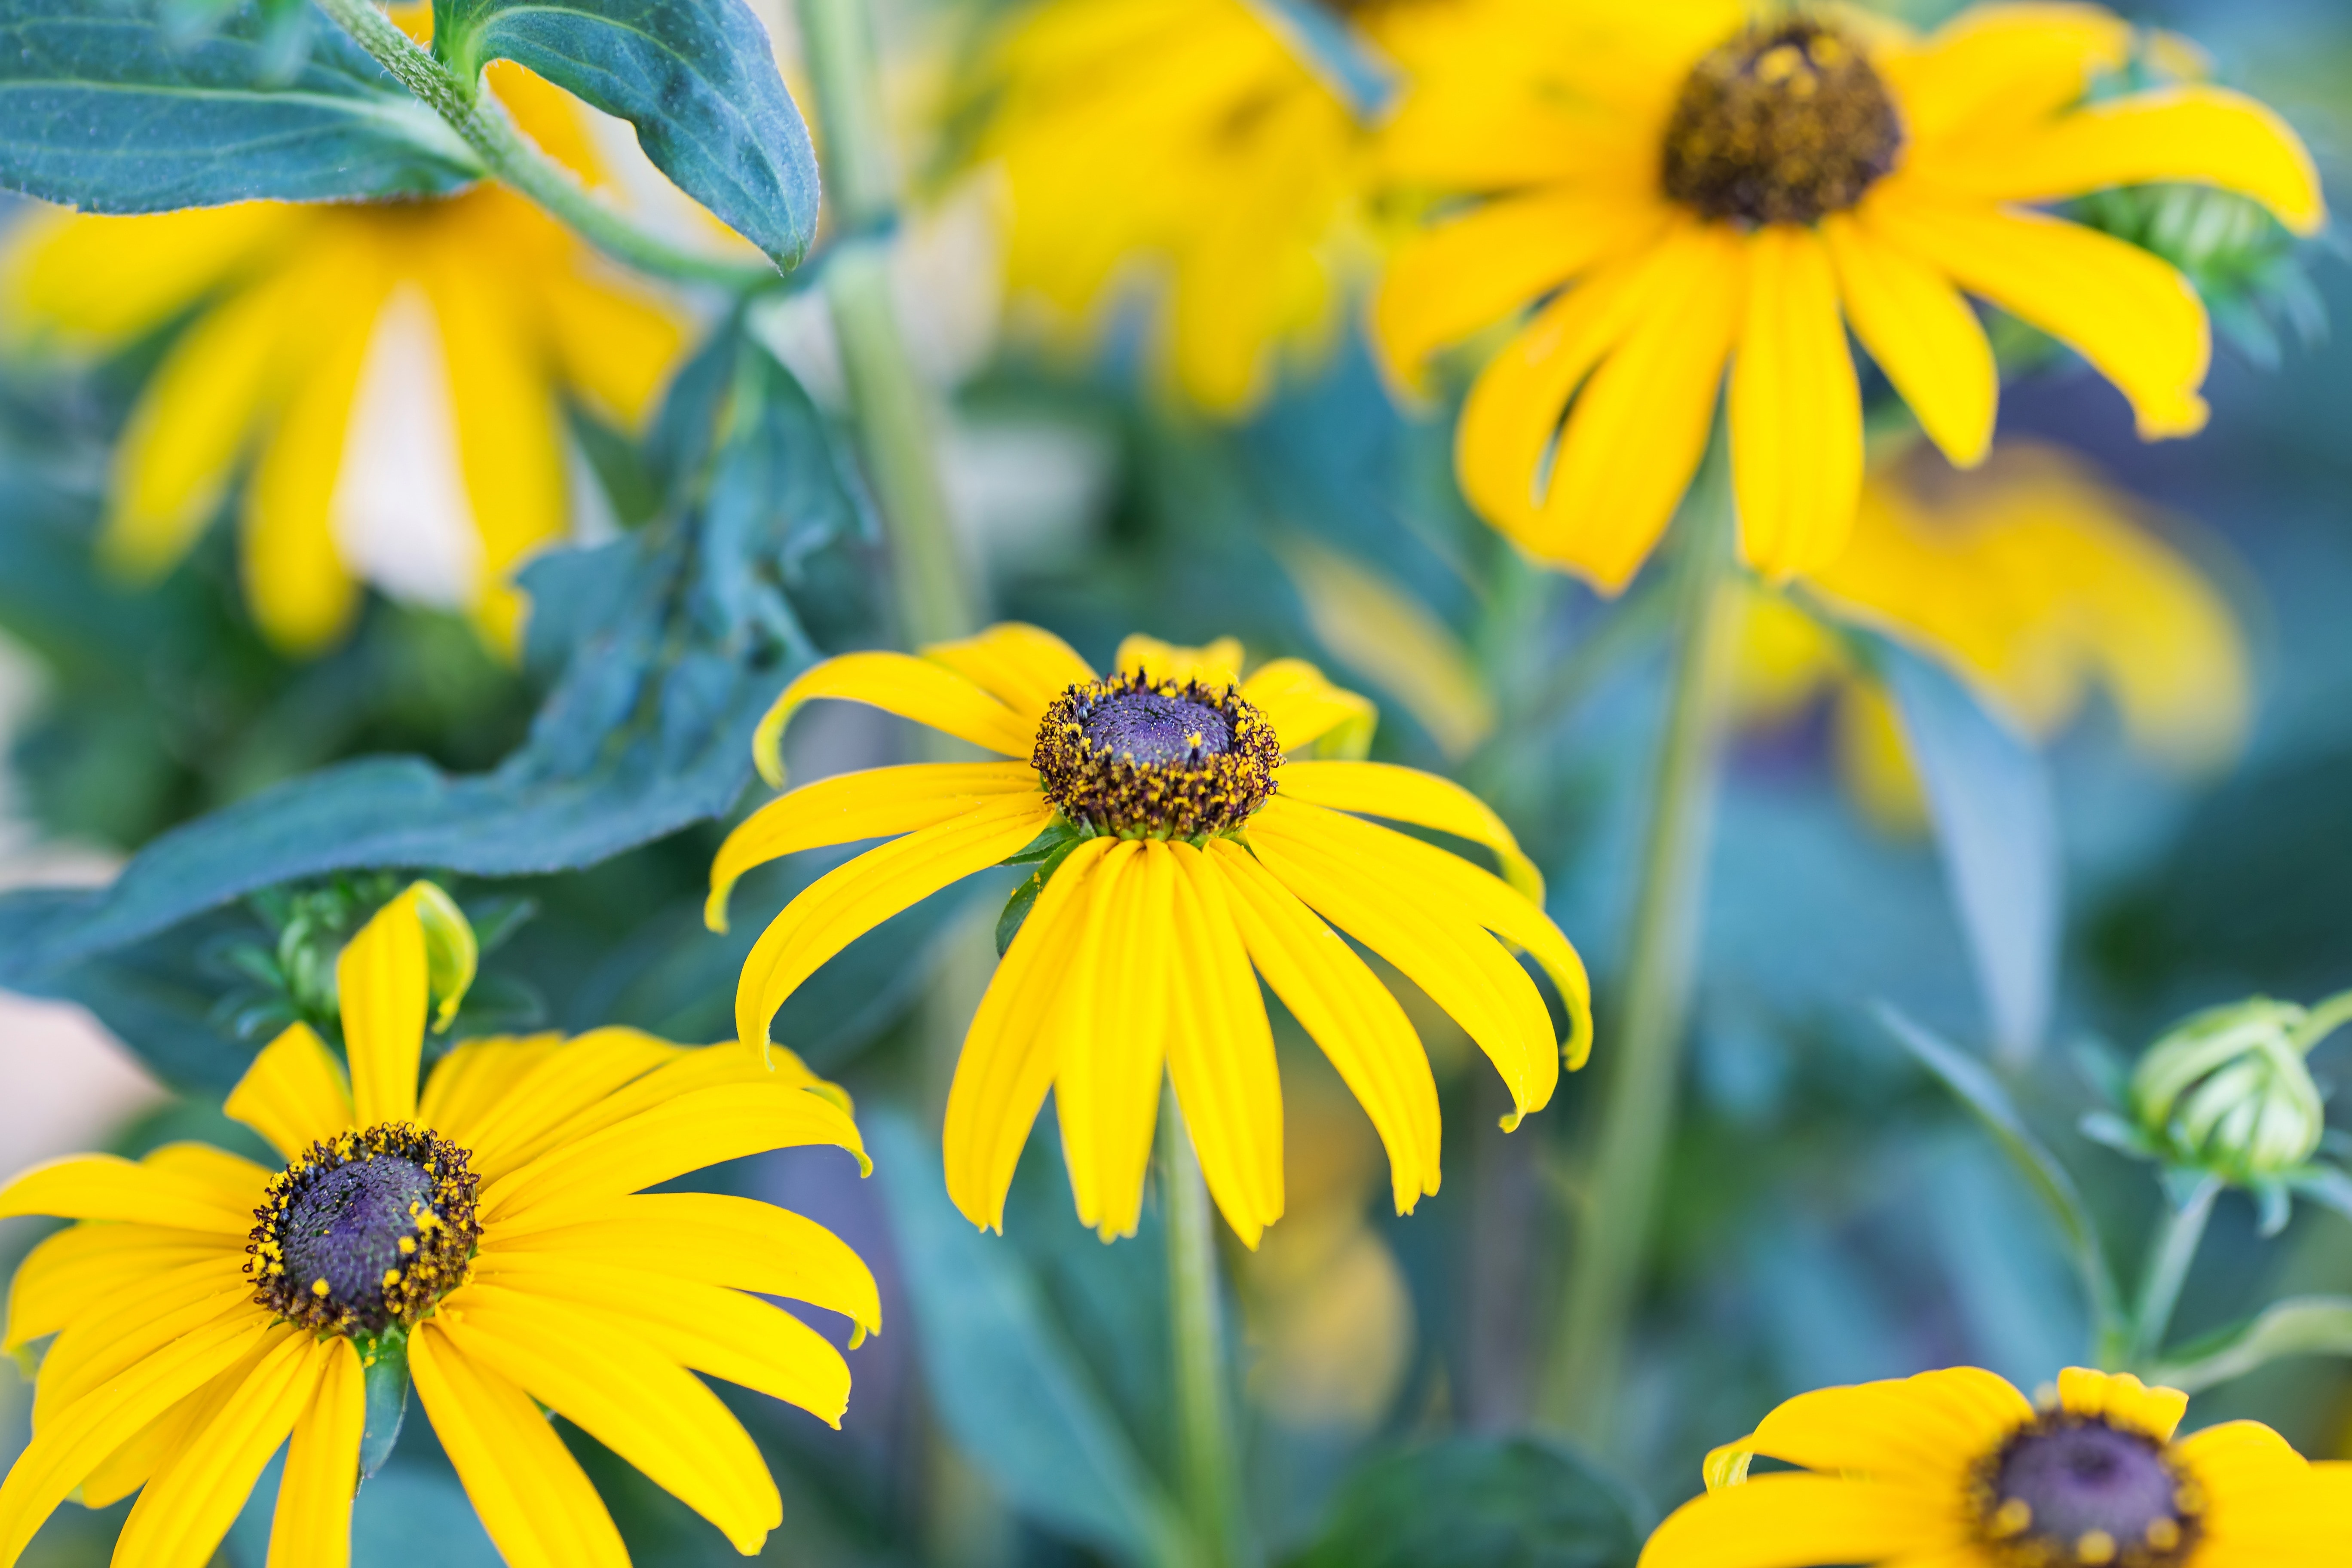 yellow multi petaled flowers closeup photography during daytime